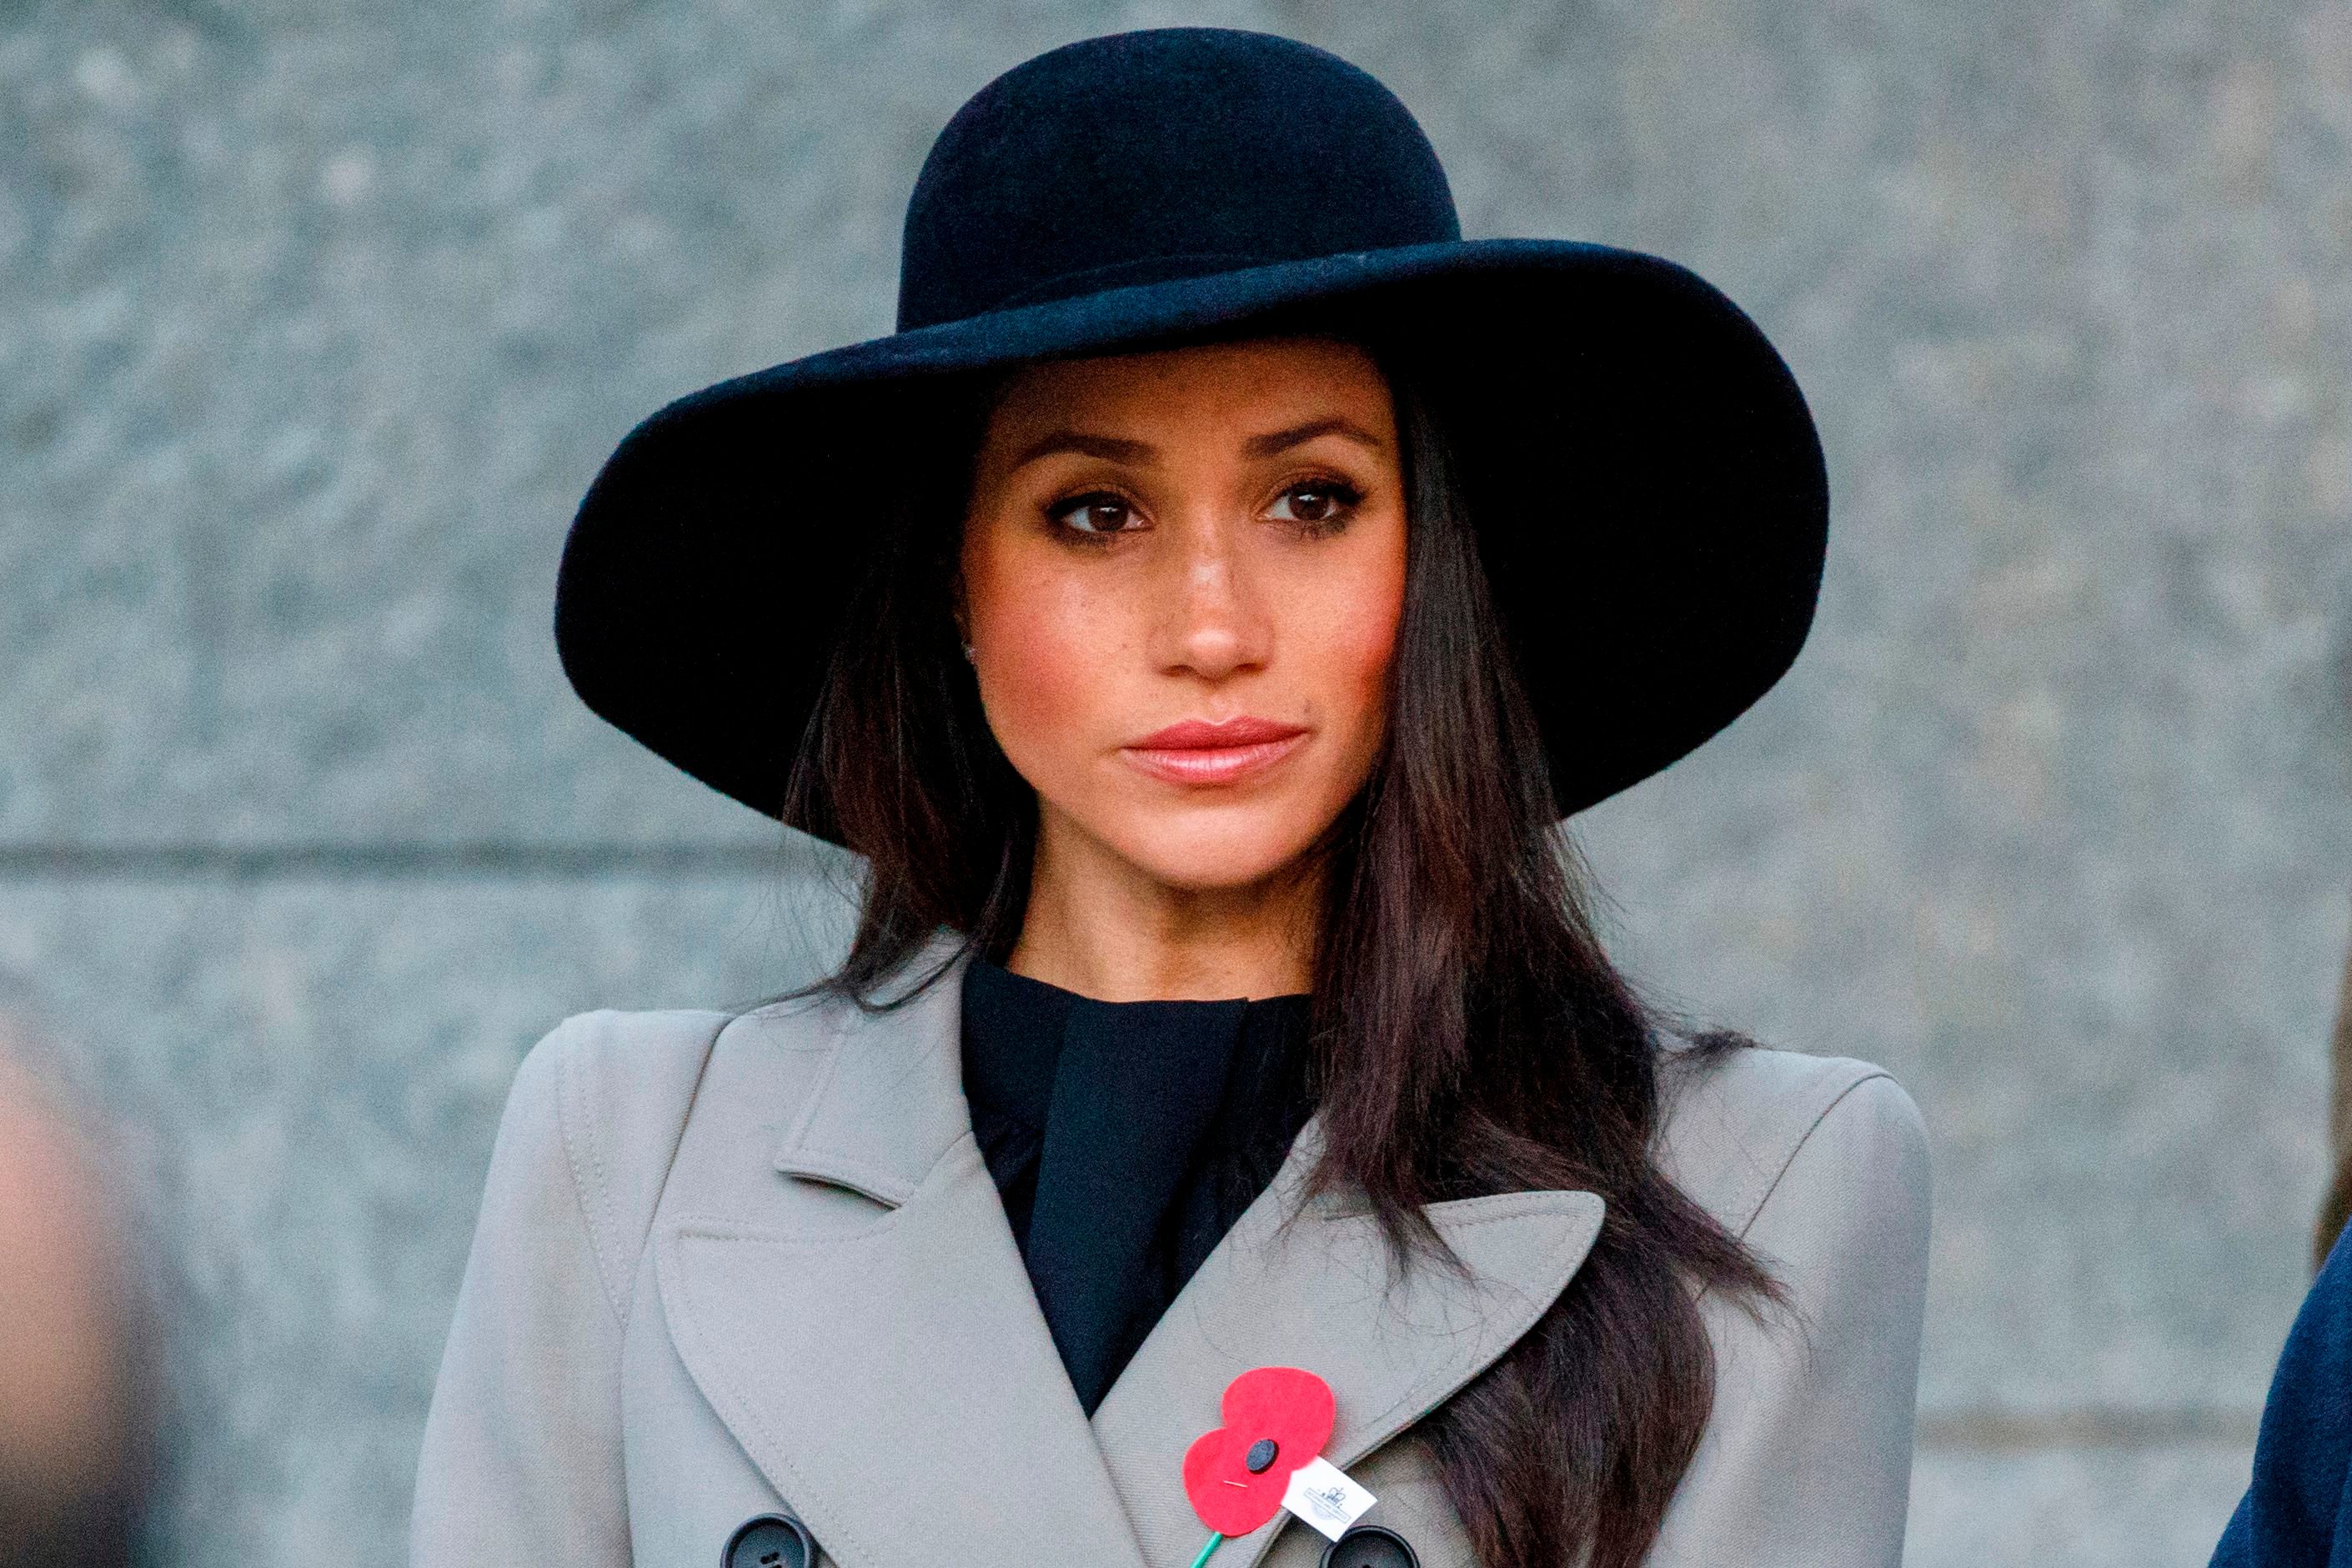 Meghan Markle dressed in a black and grey coat at Anzac Day dawn service